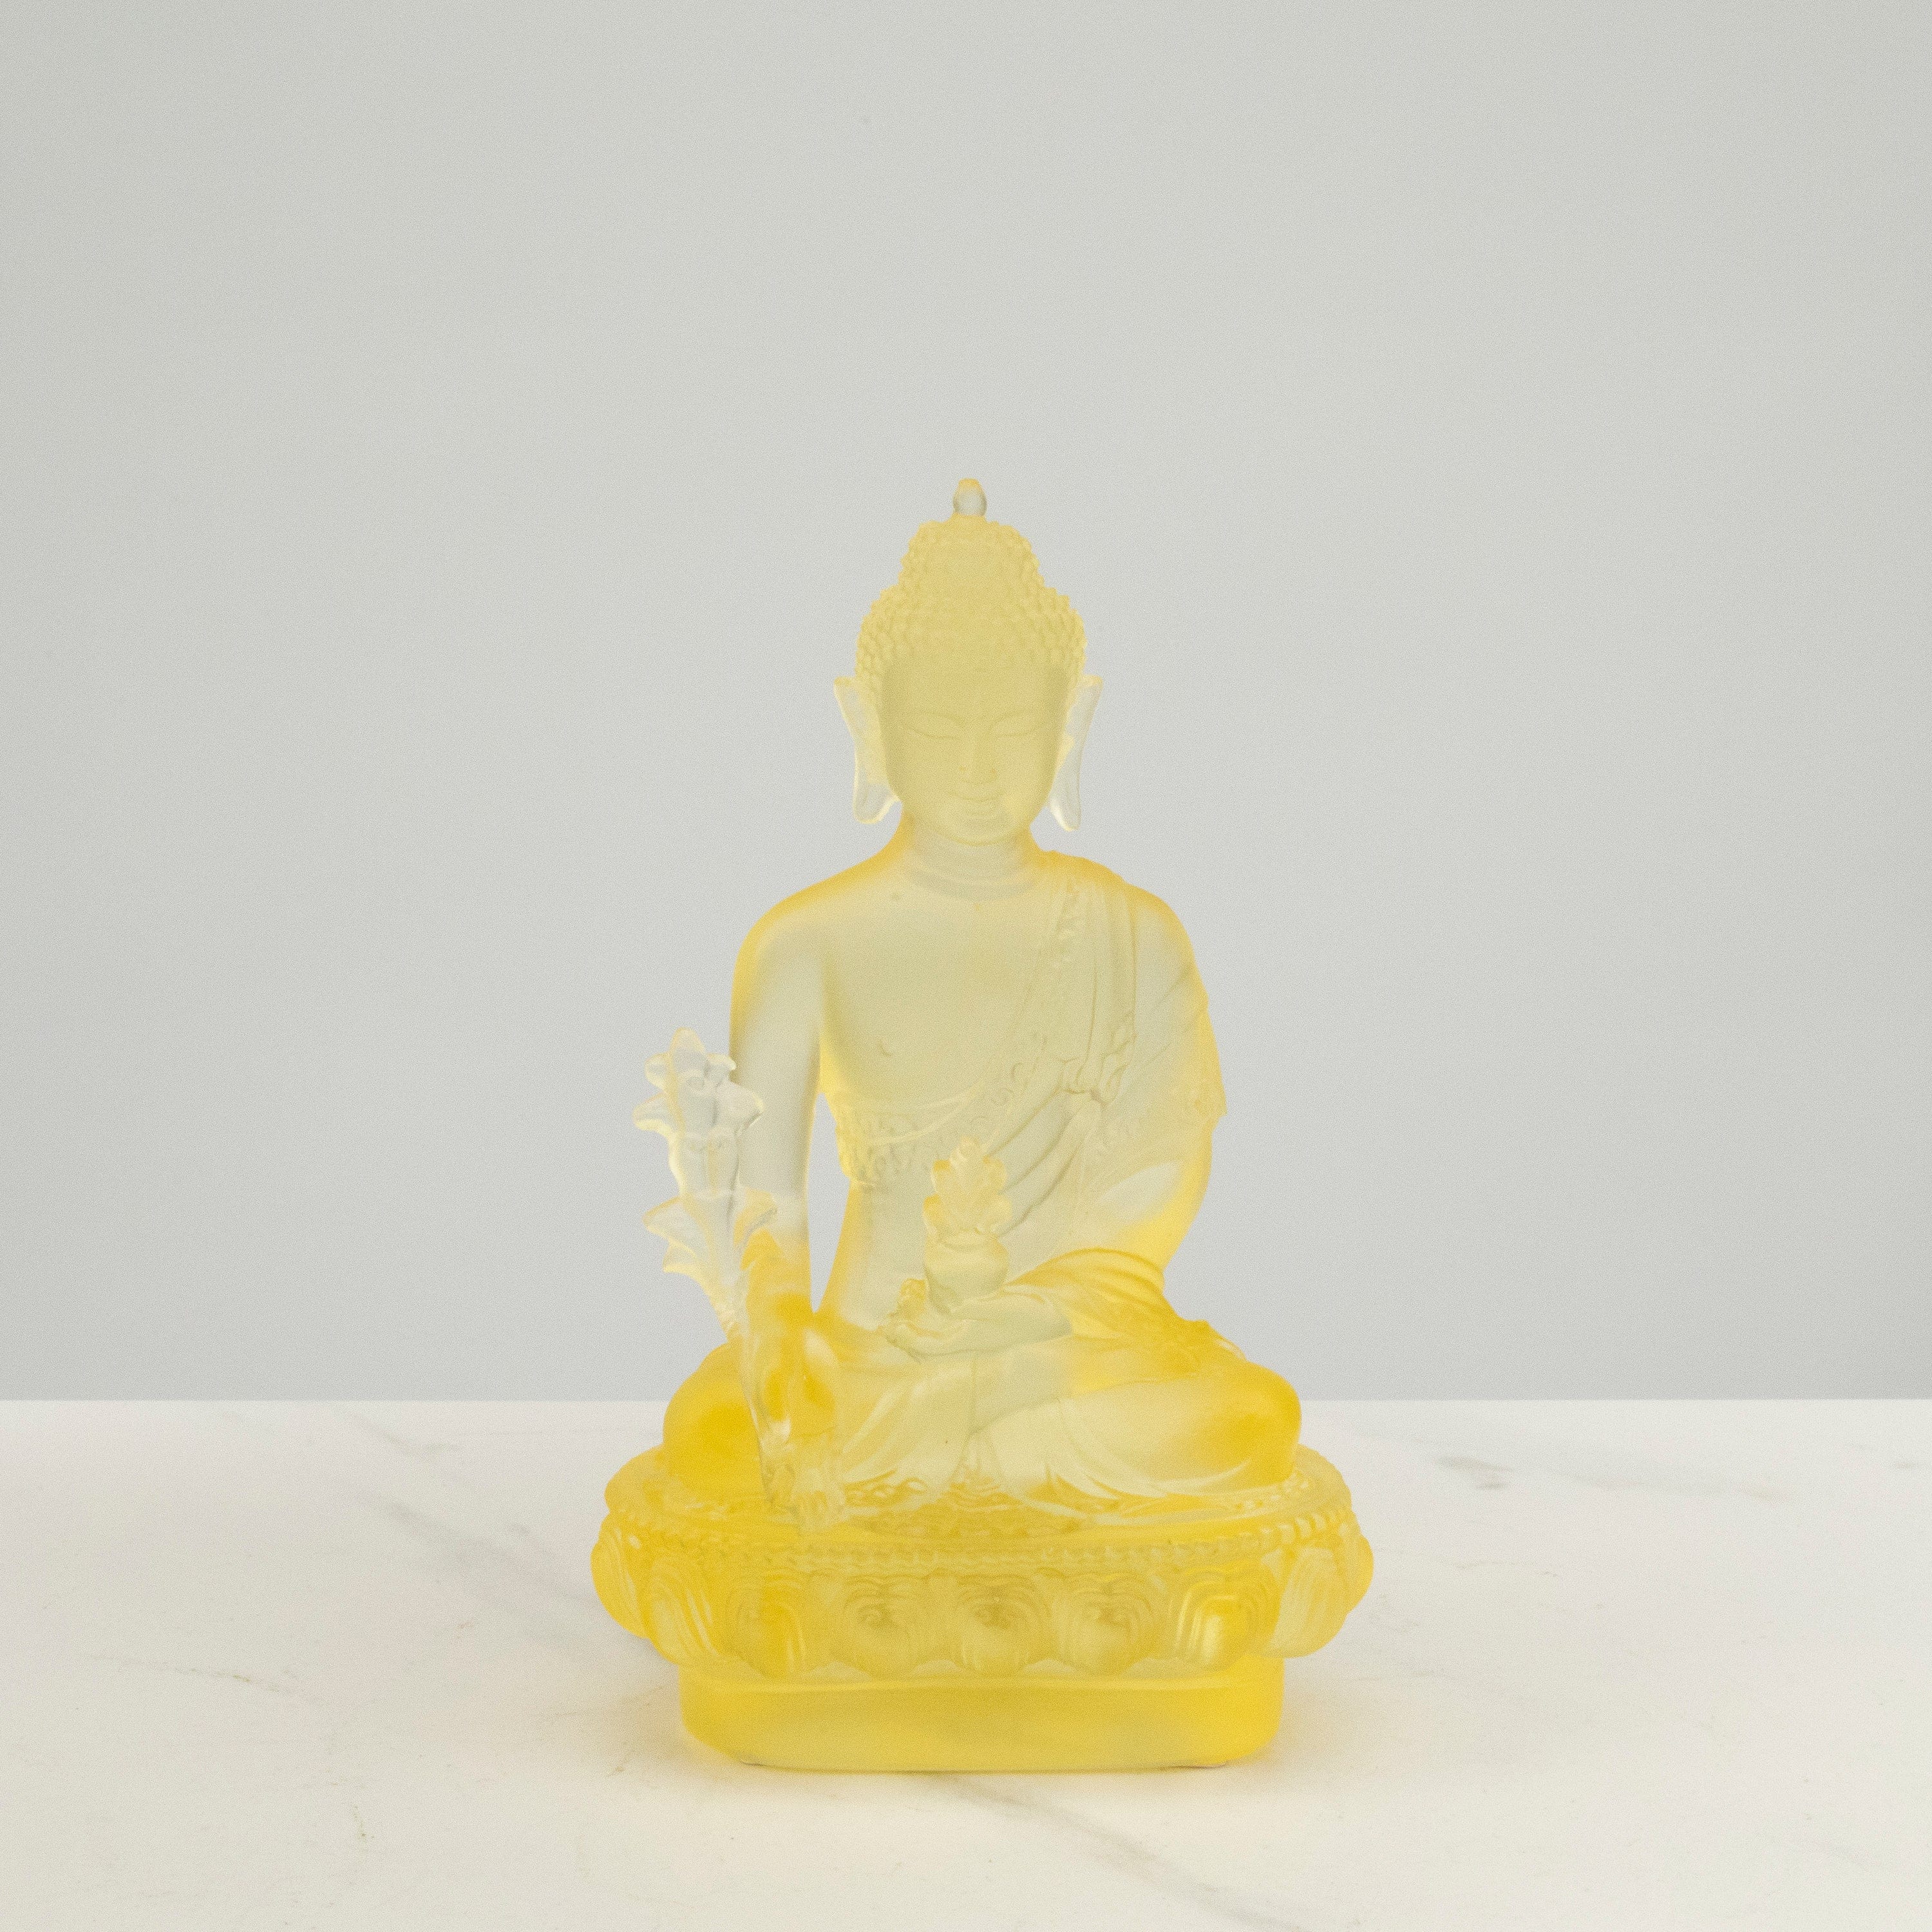 Kalifano Crystal Carving Divine Yellow Guan Yin Crystal Carving - A Symbol of Compassion and Protection CRB110-YL